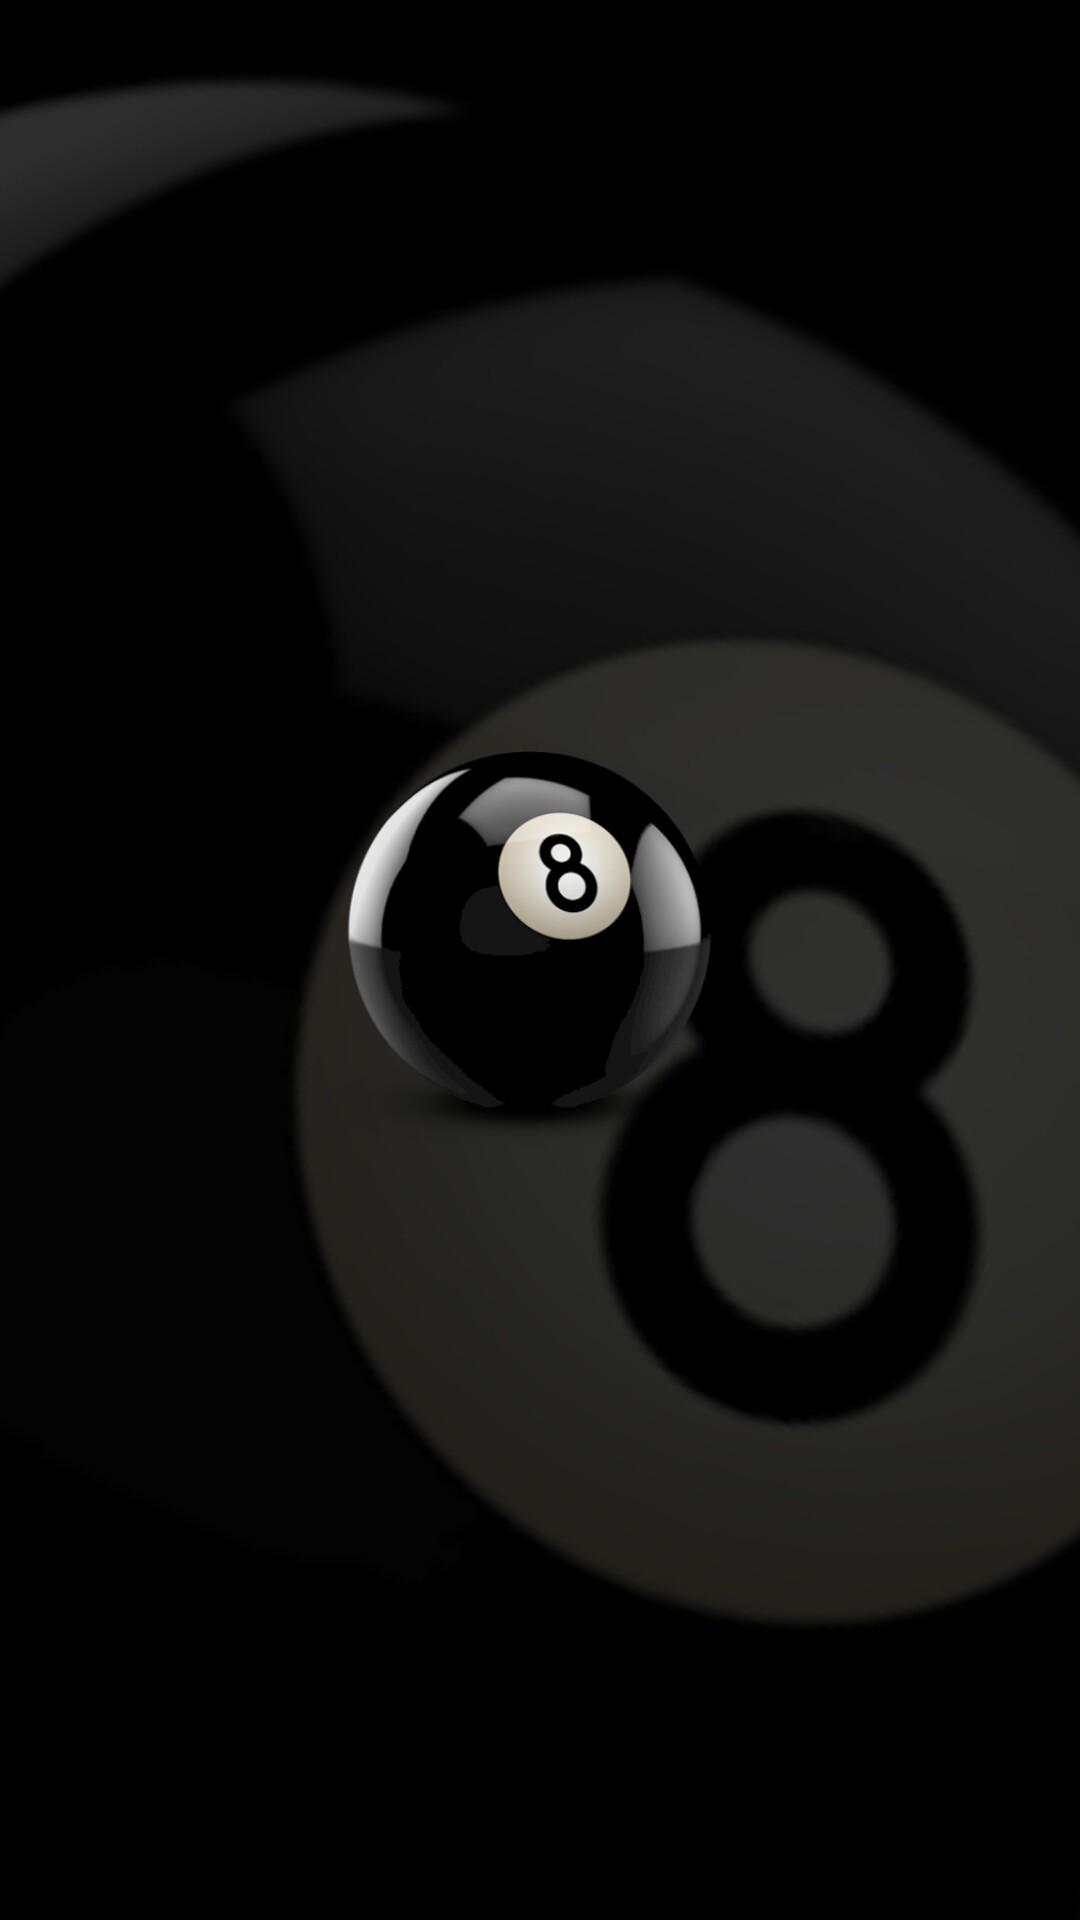 8 Ball Pool 4k Android Wallpapers - Wallpaper Cave